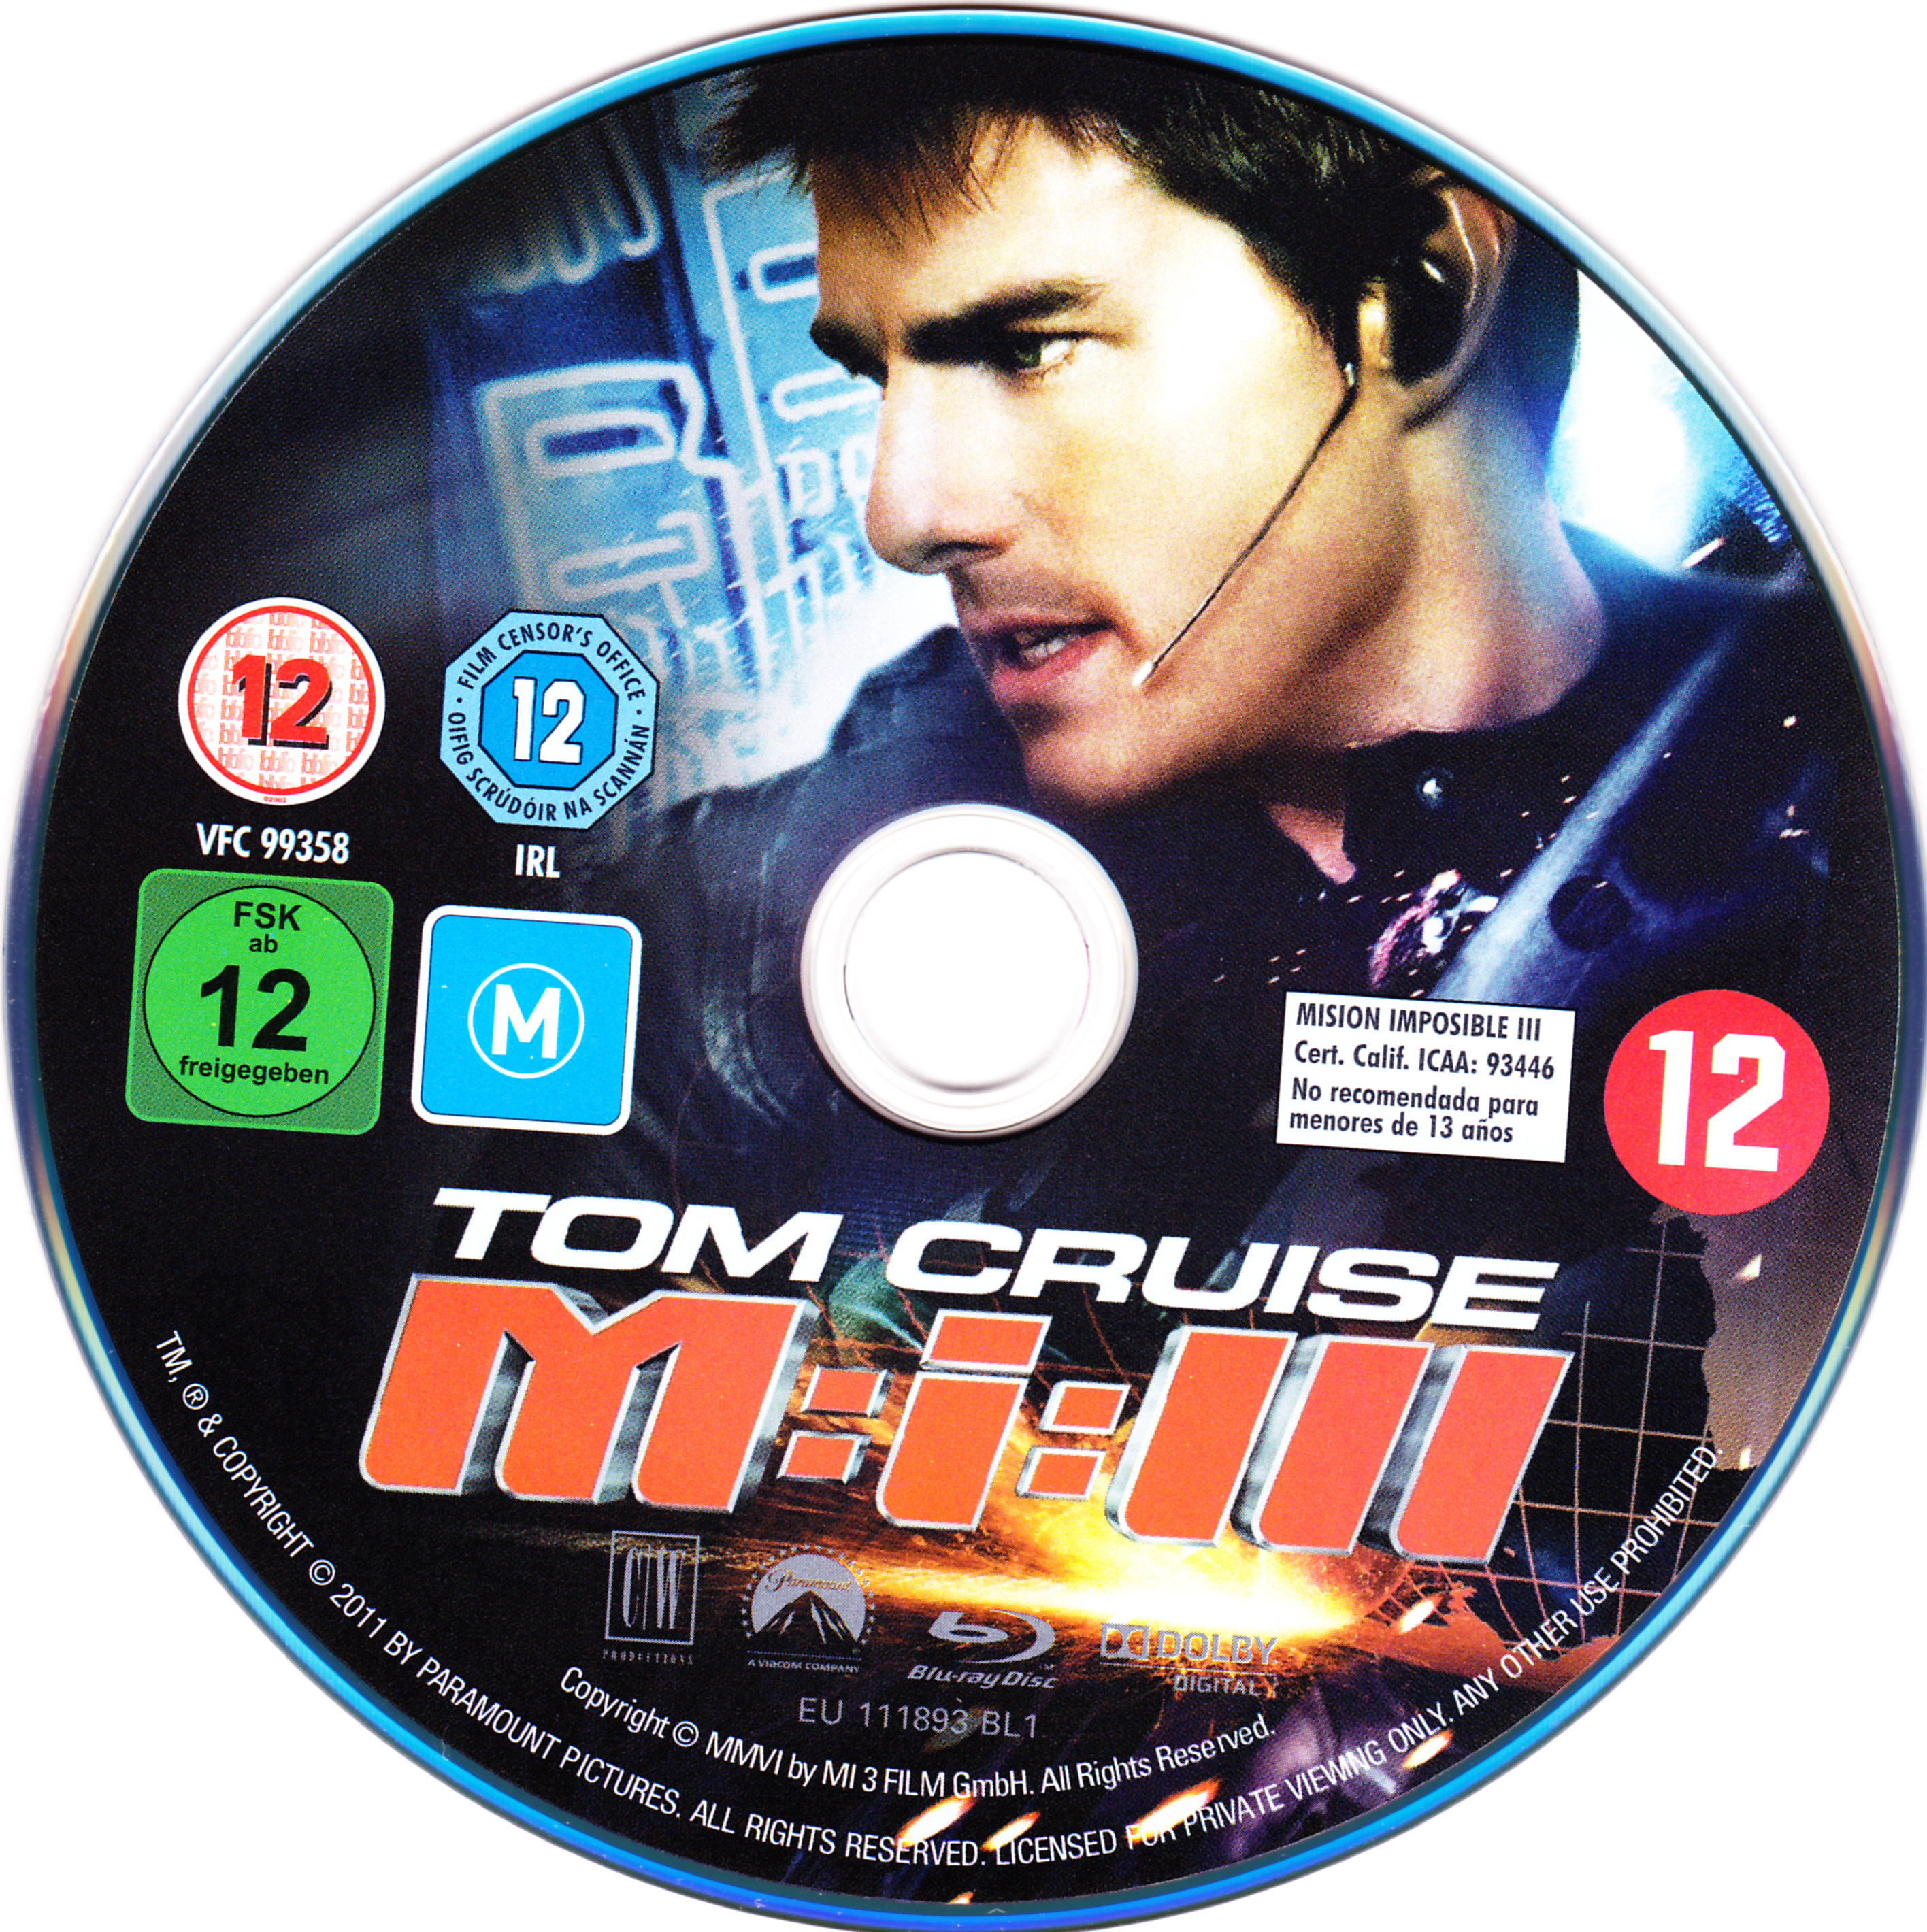 Mission impossible 3 (BLU-RAY)